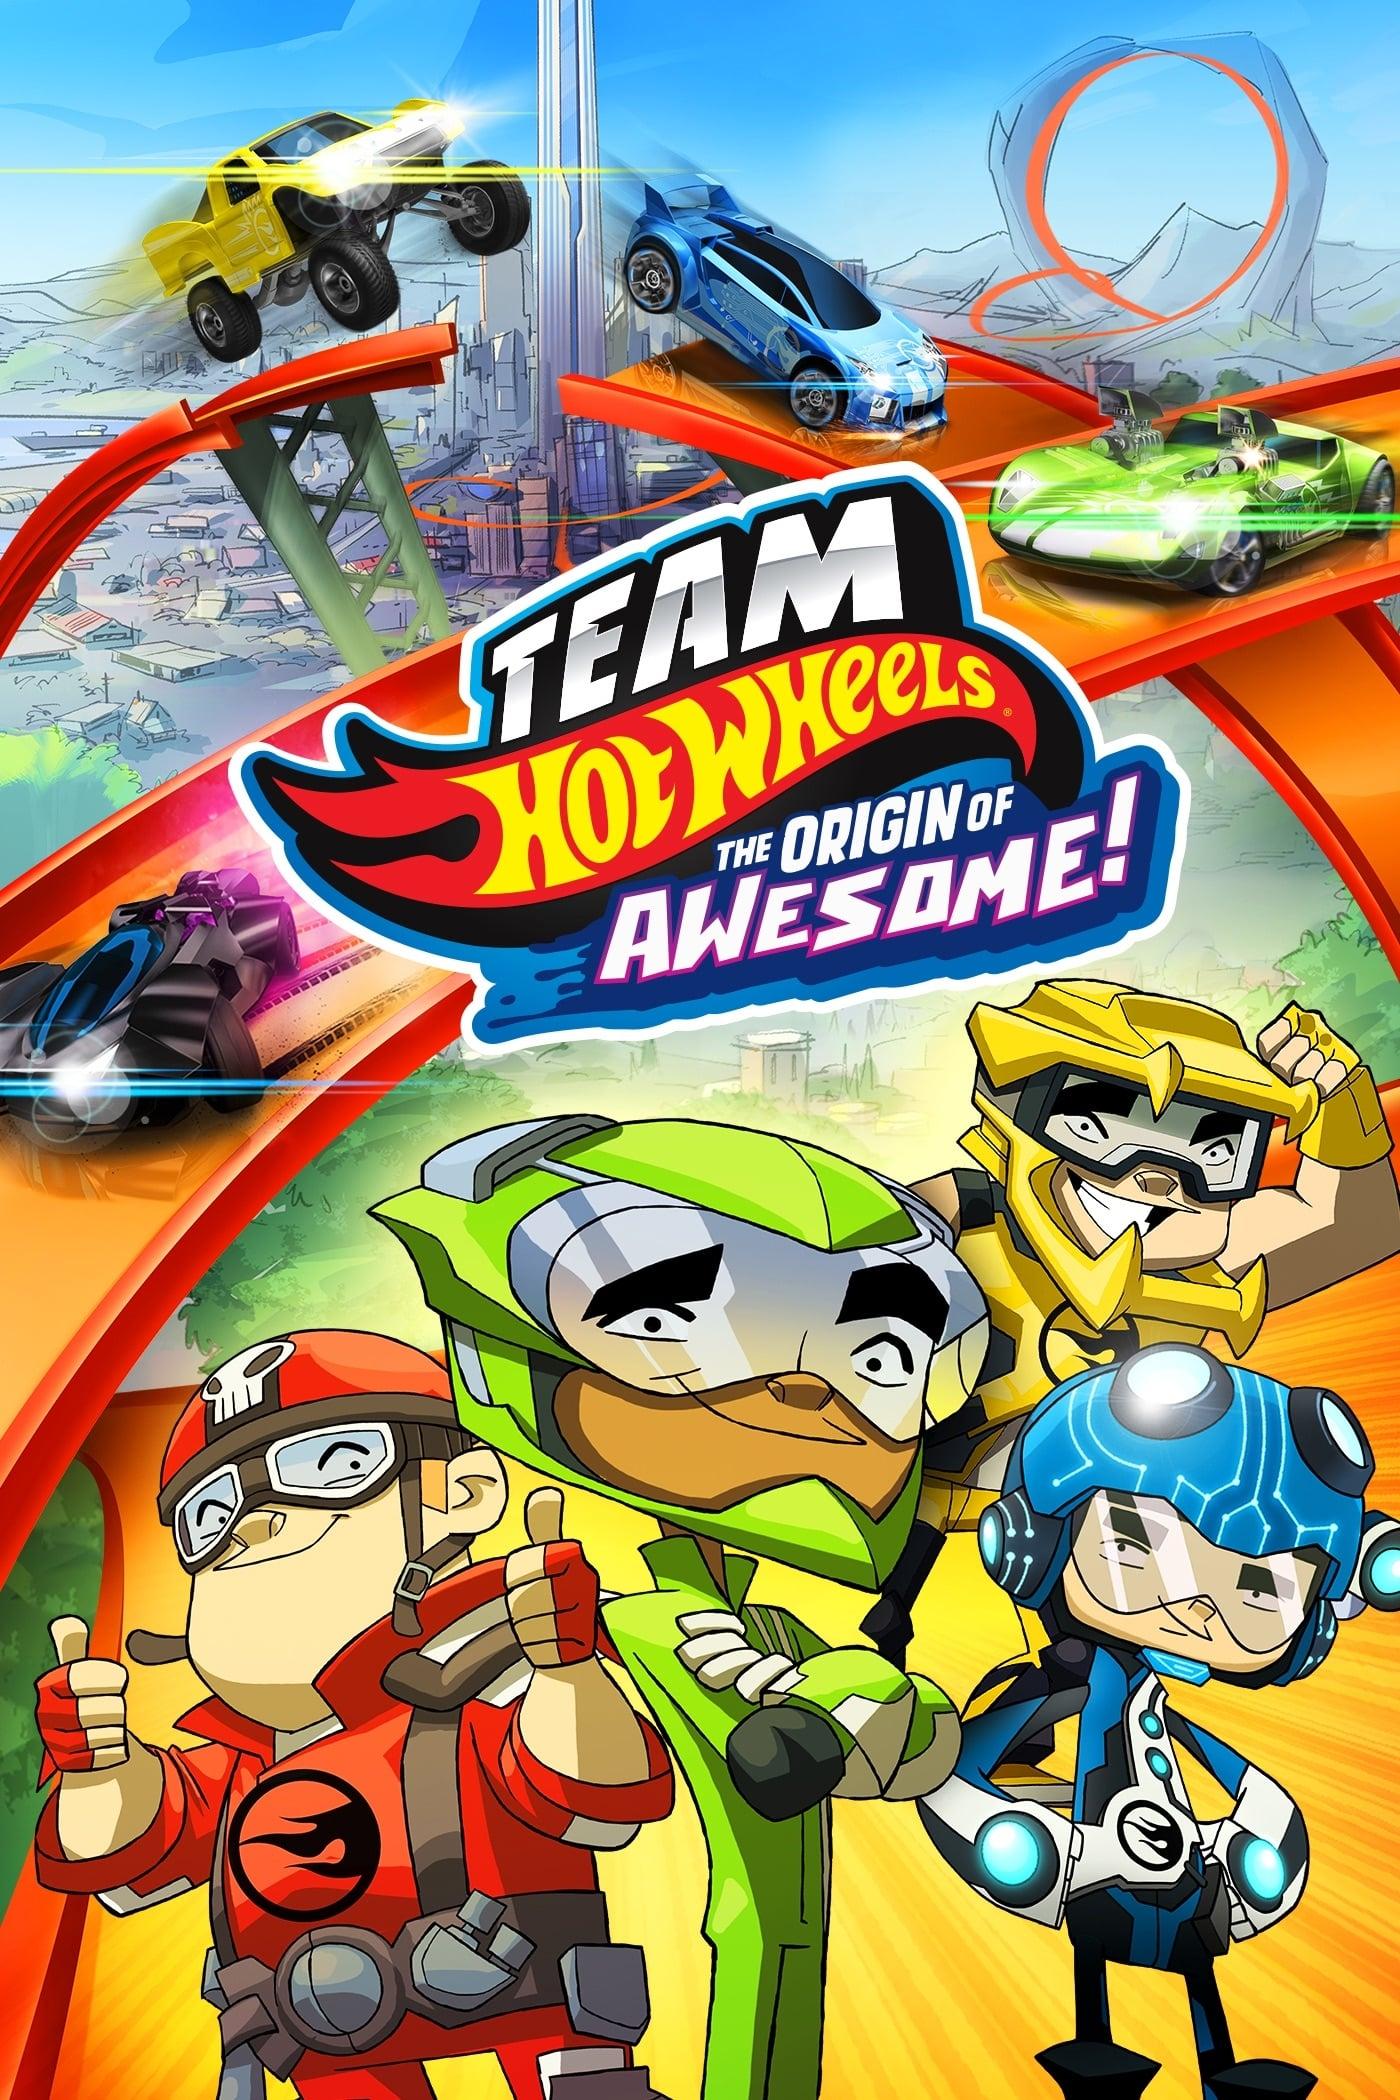 Team Hot Wheels: The Origin of Awesome! poster